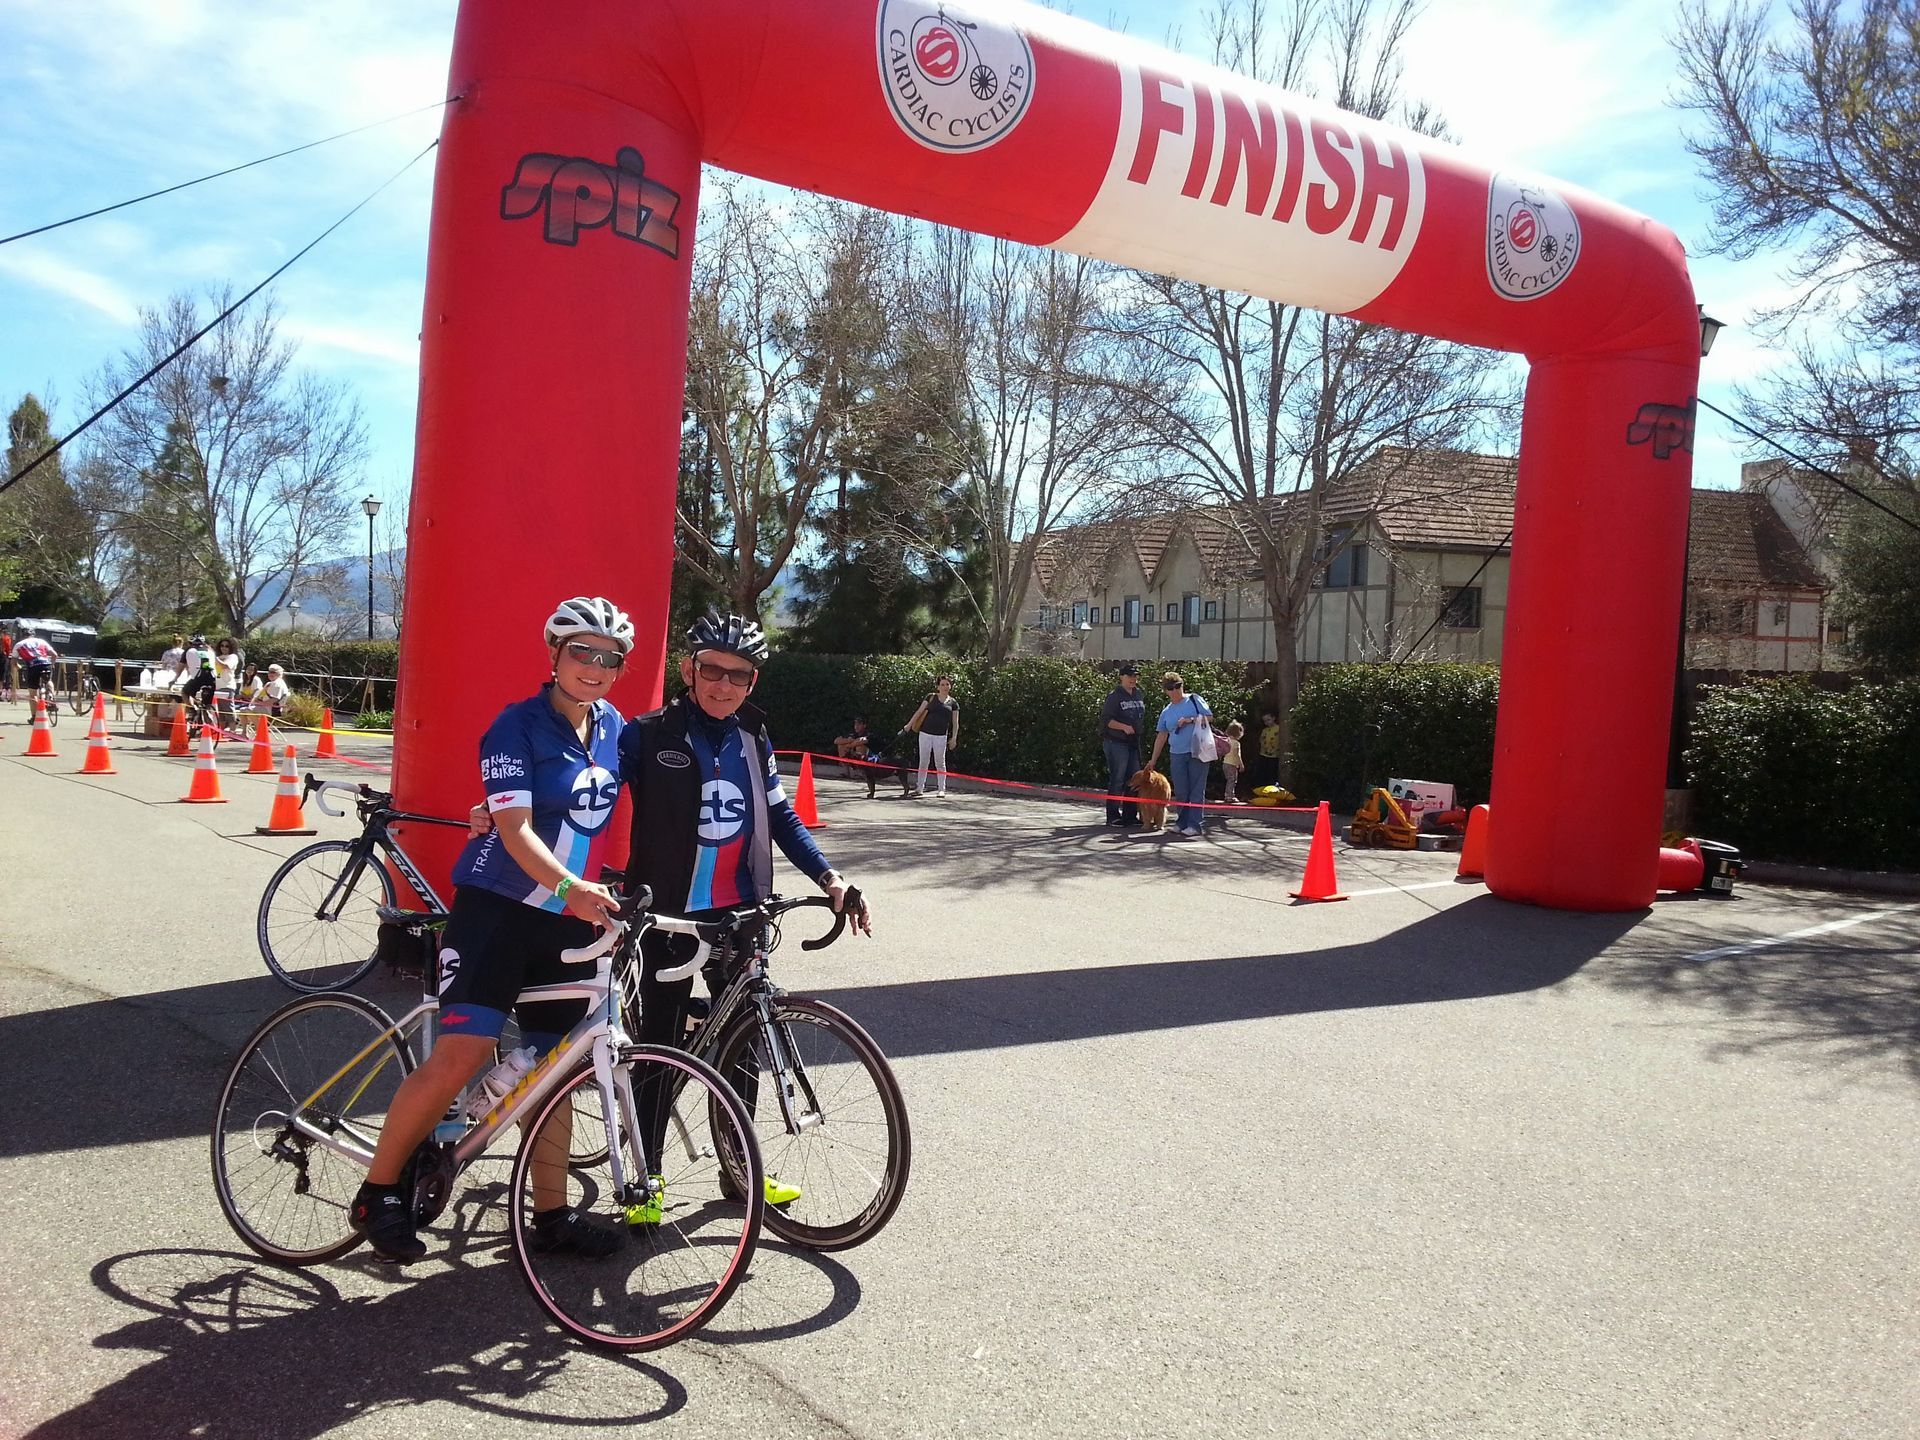 Couple on bicycles at race finish line banner